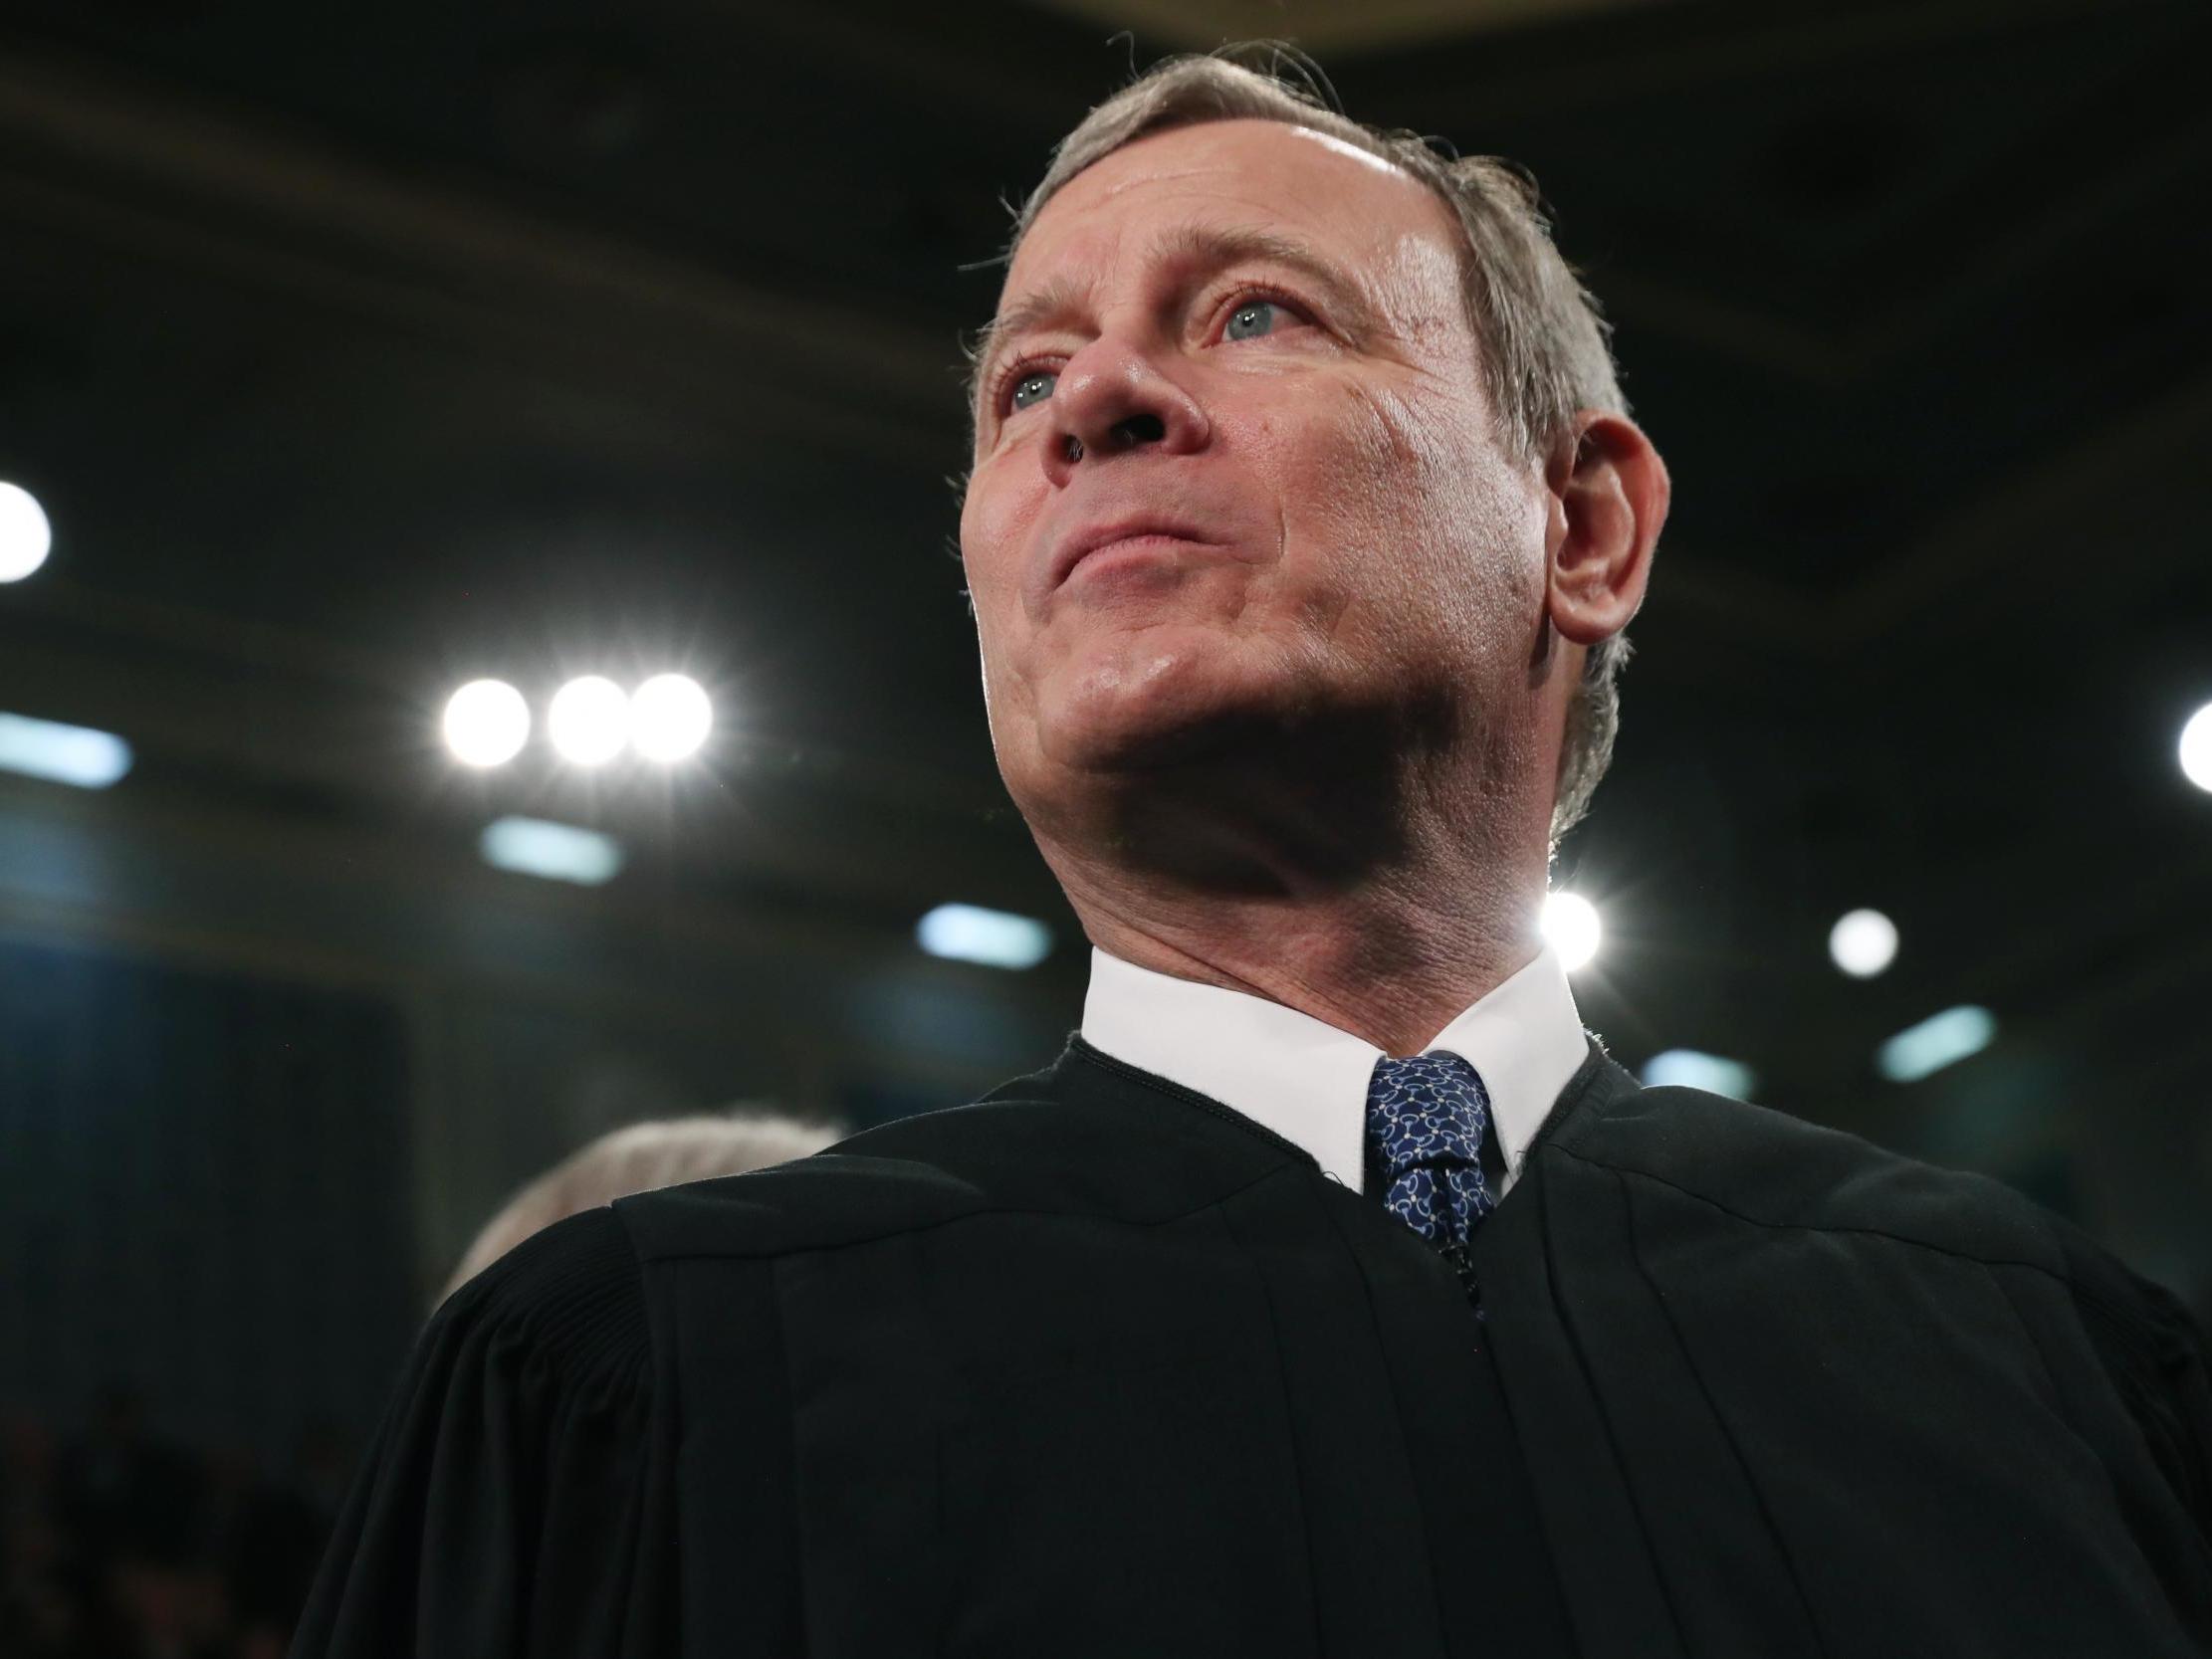 The Supreme Court is a danger to American democracy, whether Chief Justice Roberts sided with liberals on abortion or not